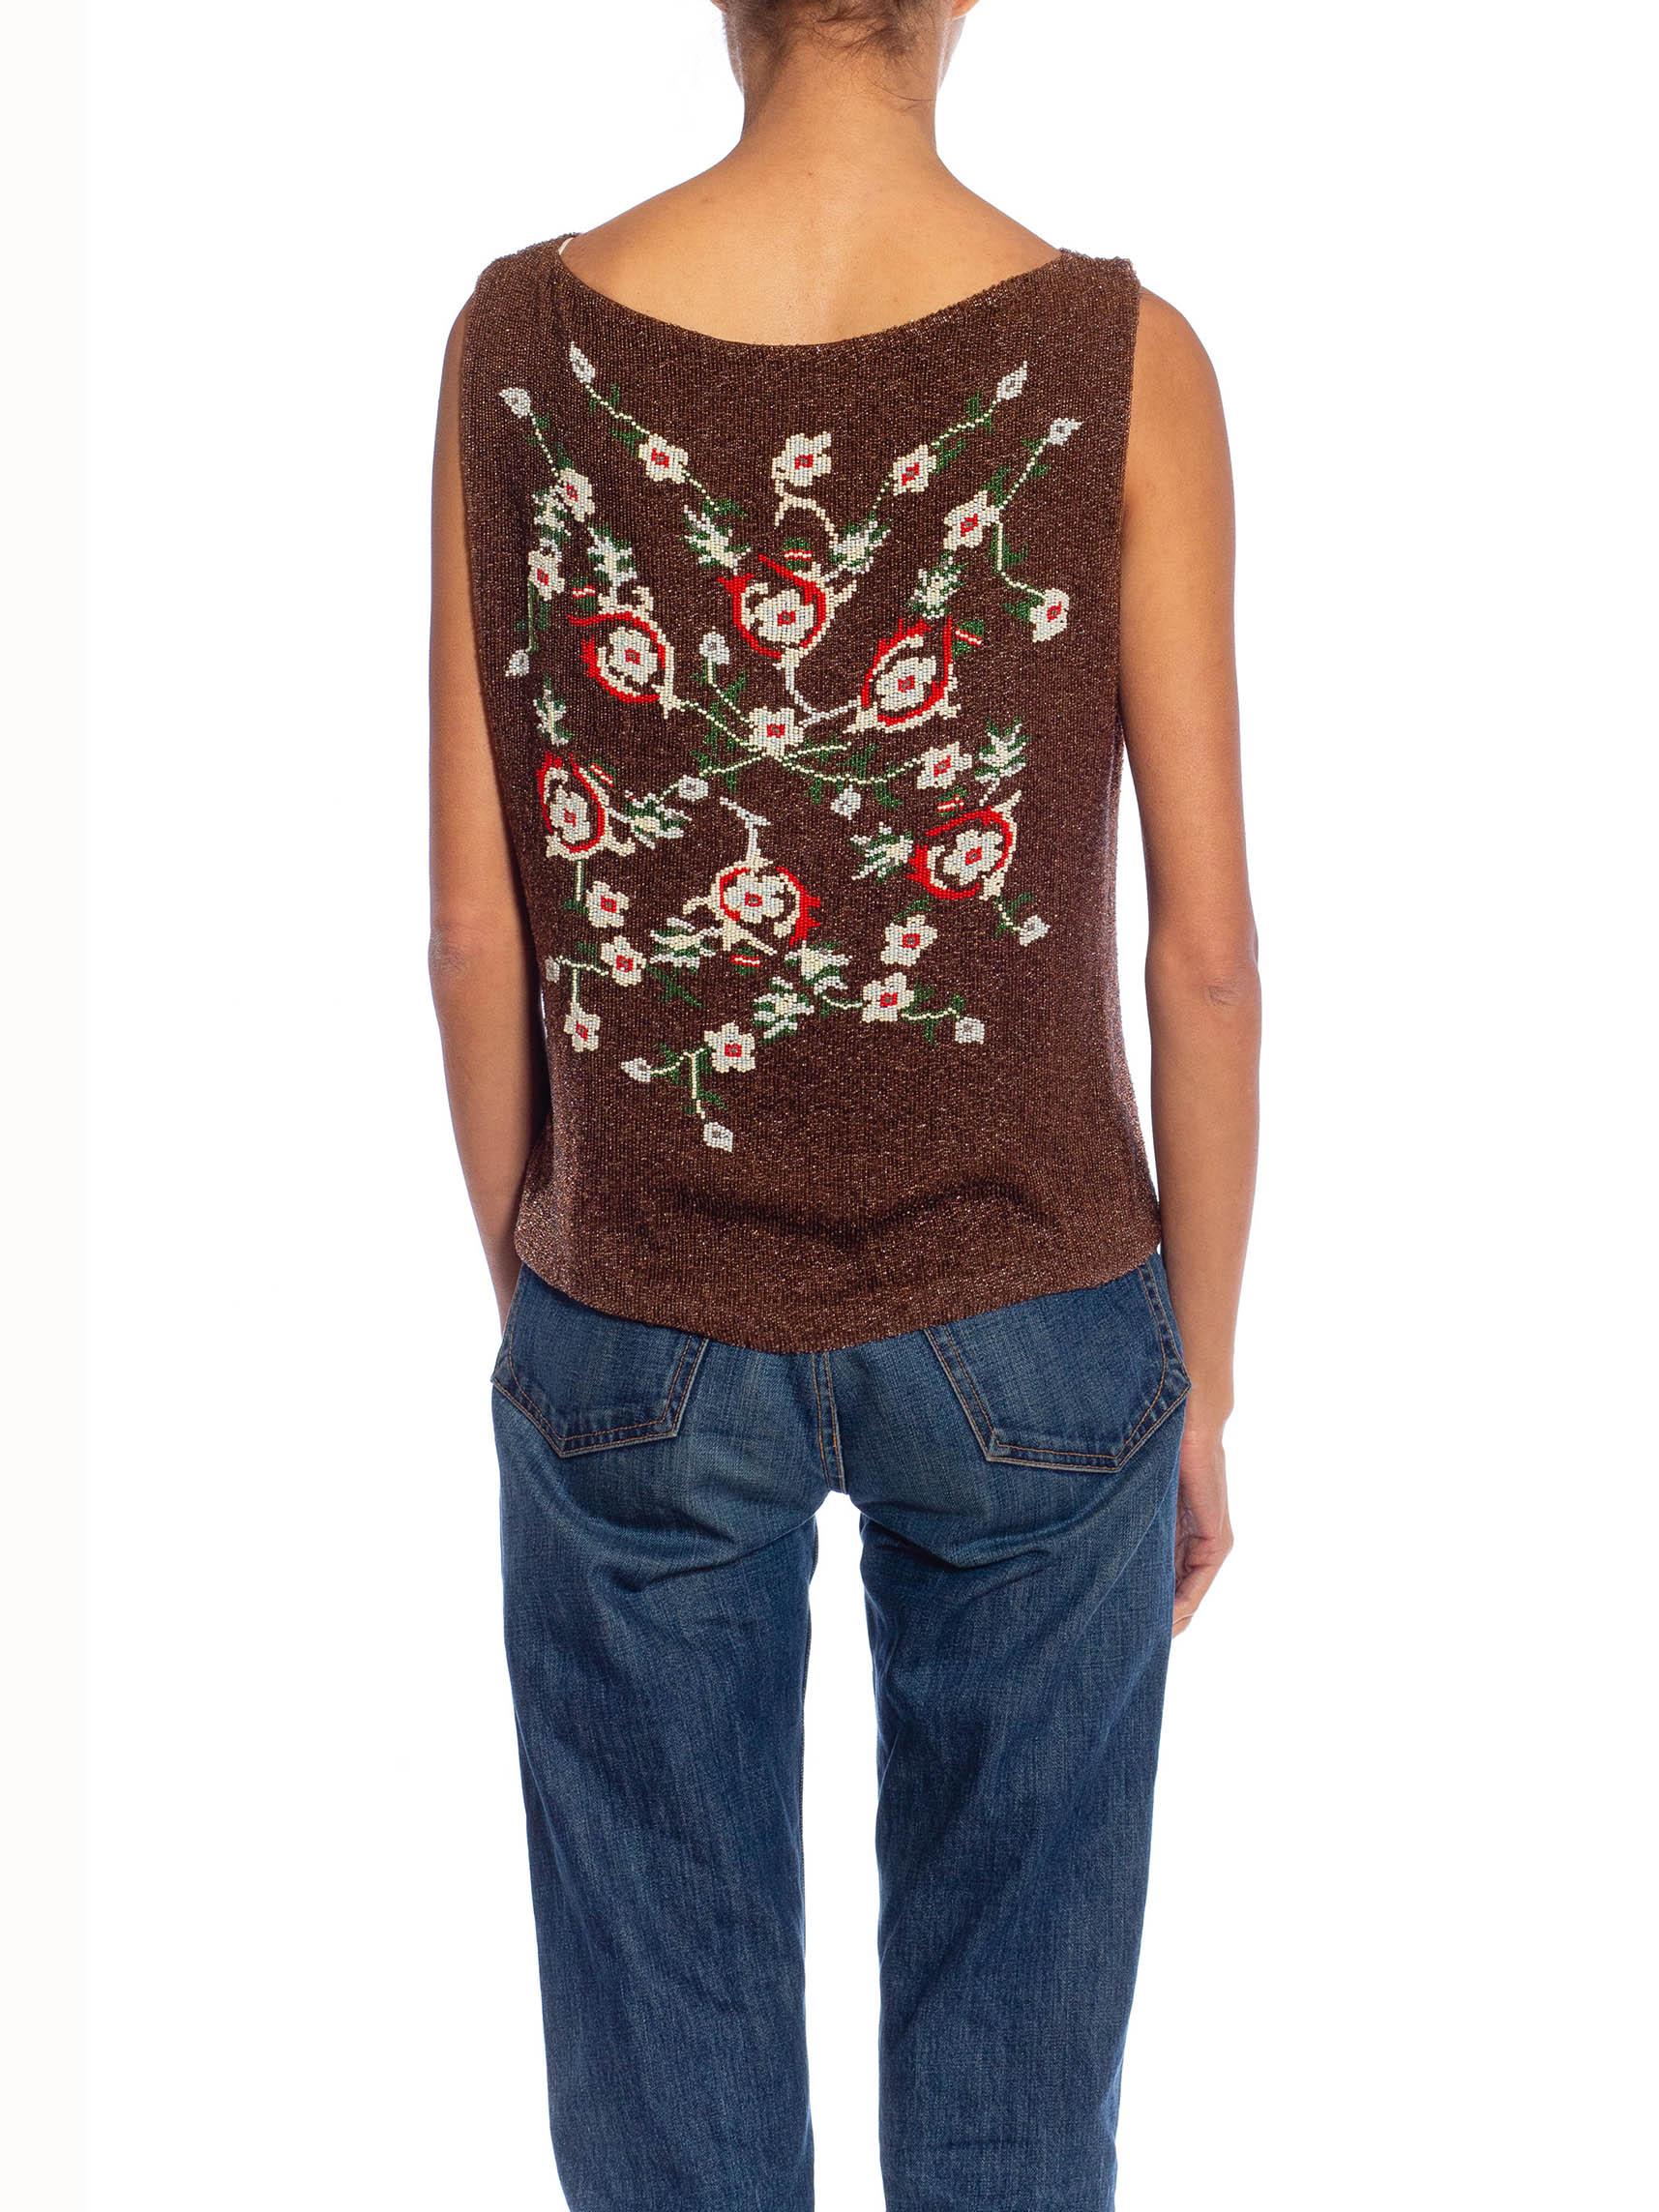 1990S Brown, Red & Green Floral Silk Beaded Top For Sale 4